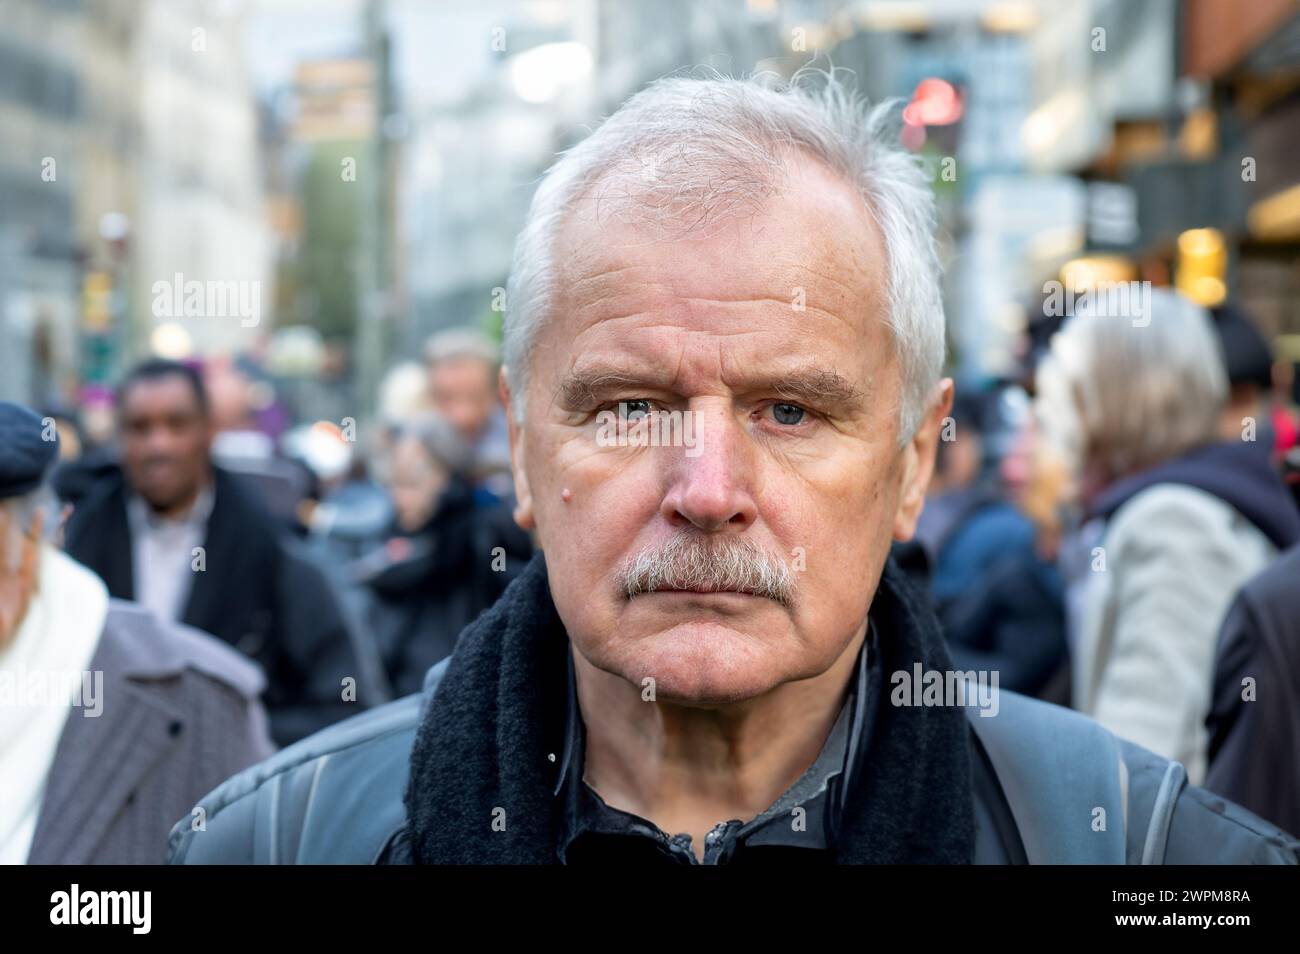 Portrait of senior citizen in a crowded street. Stock Photo